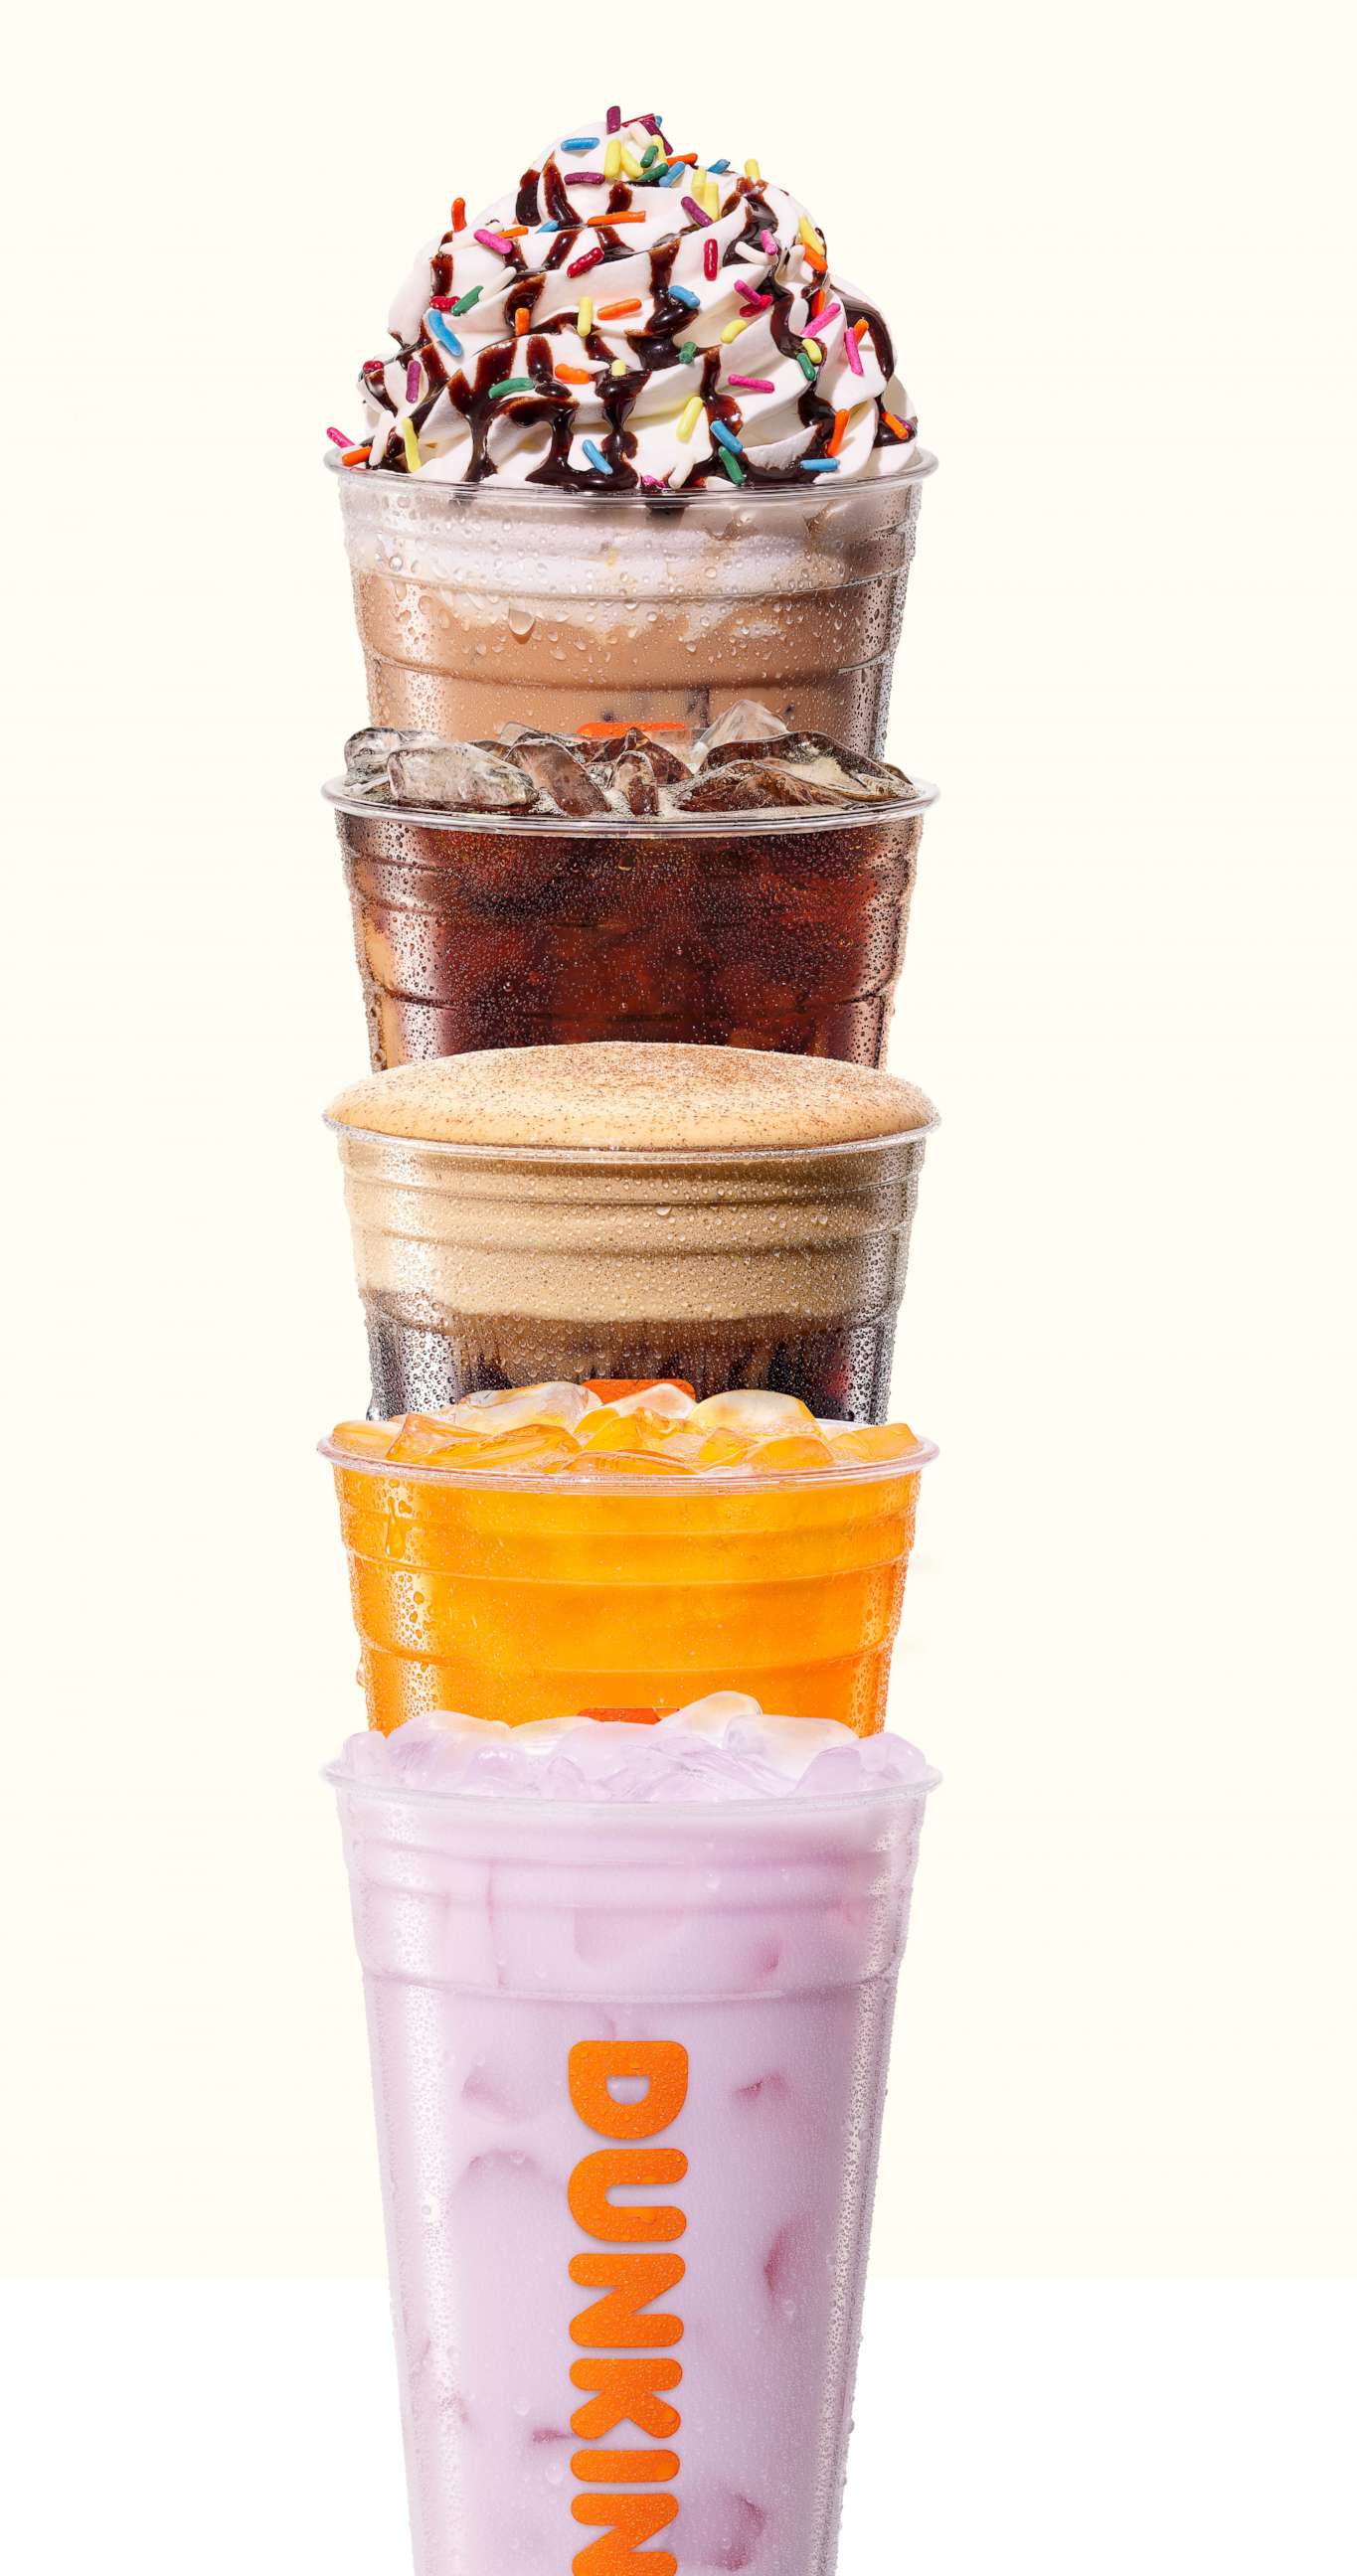 PHOTO: The summer lineup of drinks at Dunkin'.